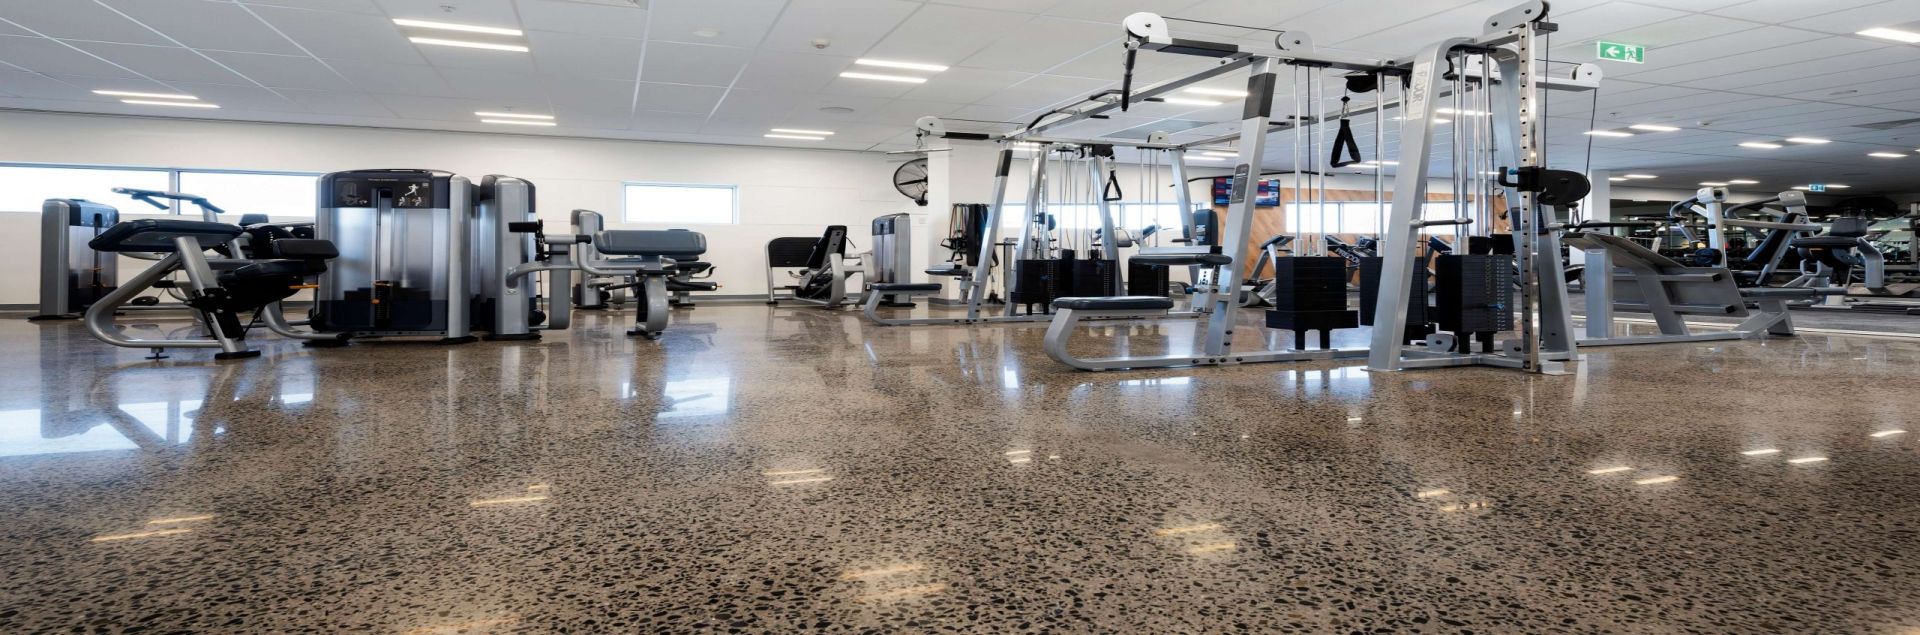 Polished concrete in gym surrounded by weight lifting equipment